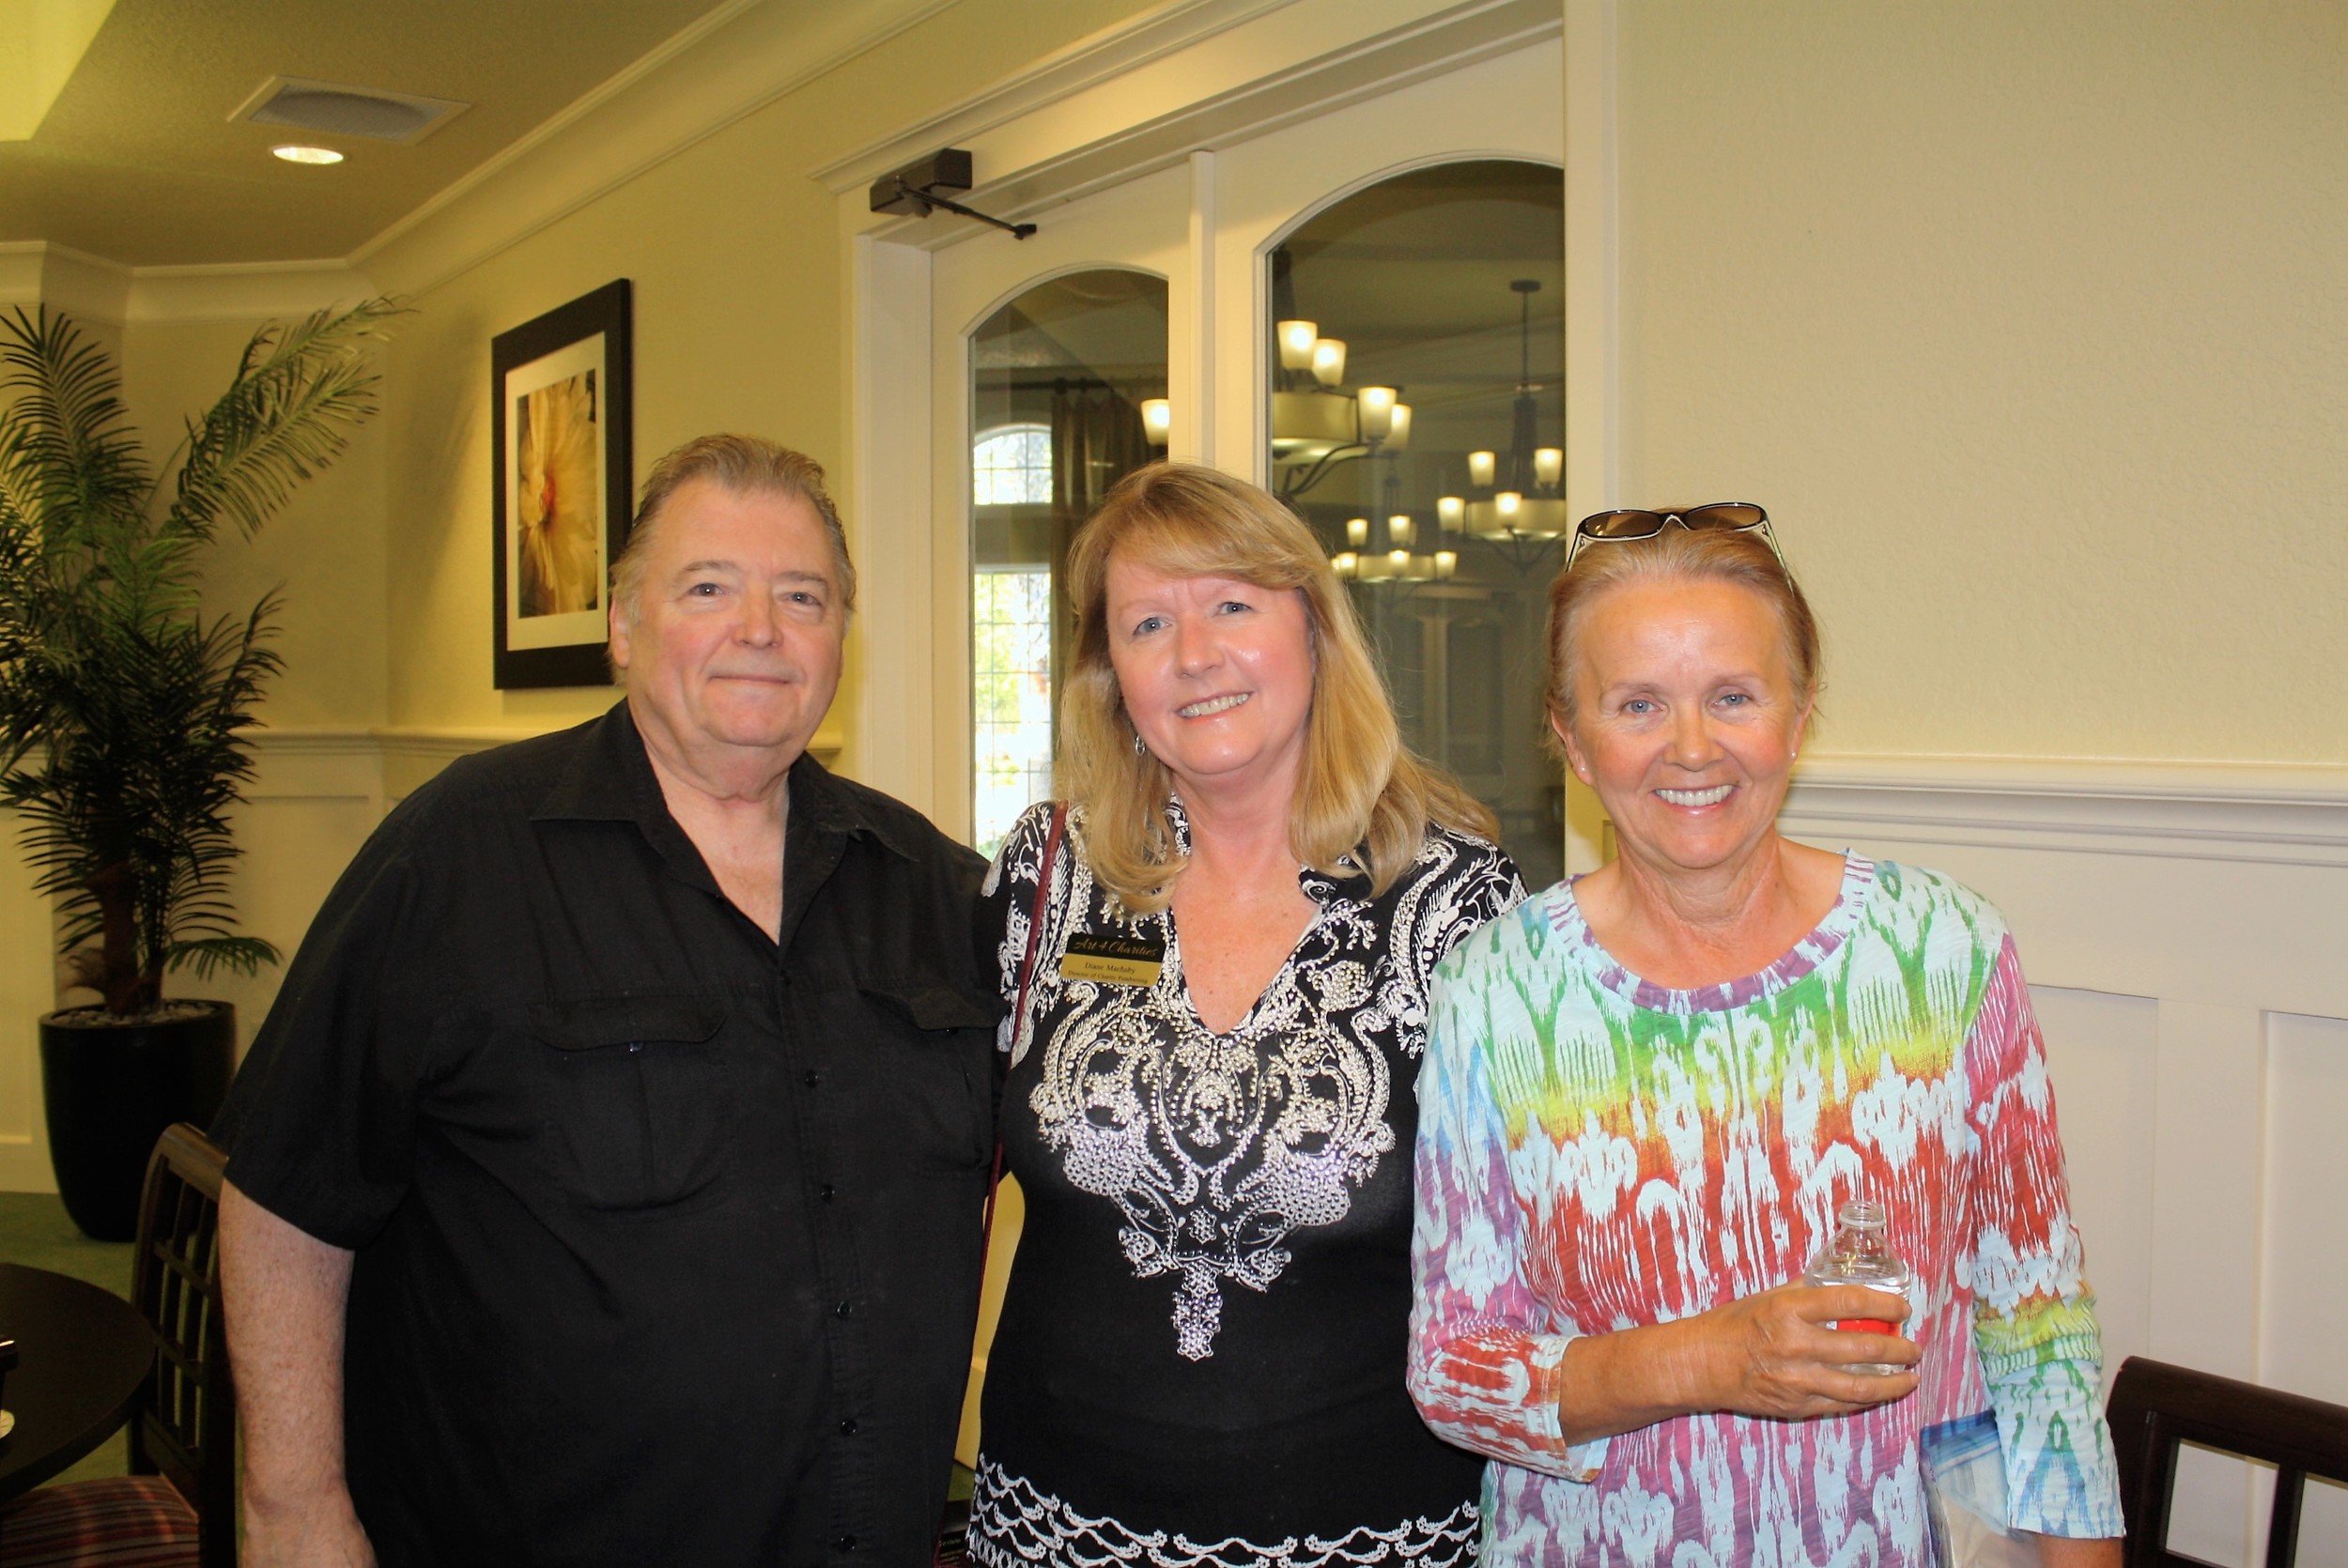 Terry and Diane Machaby of Art 4 Charities and Edith Andersen, all of Del Webb